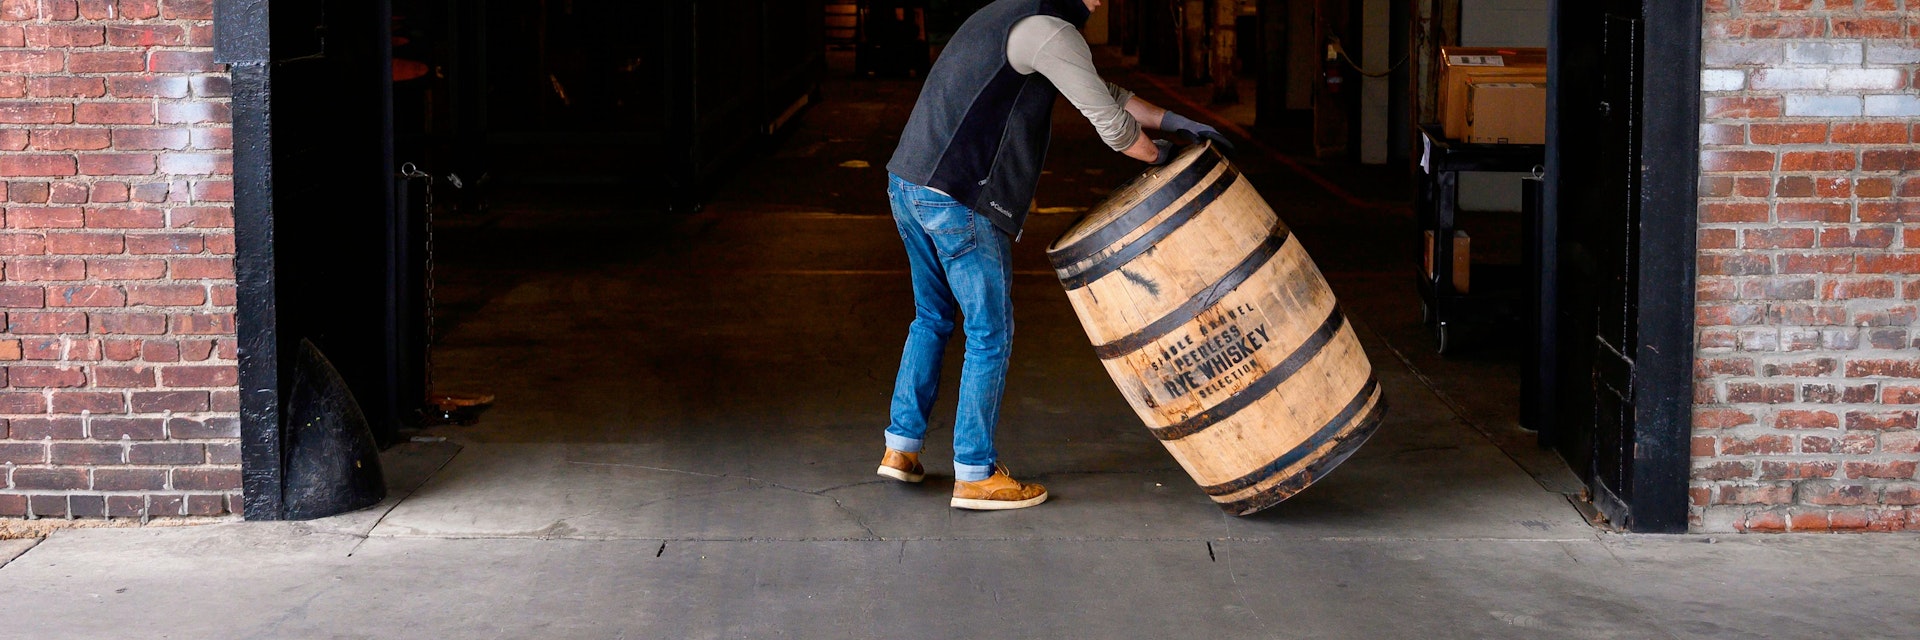 Jarrod Rampy rolls a barrel for bourbon into the Kentucky Peerless Distilling company in Louisville, Kentucky on April 11, 2019. - To be called Bourbon in the United States the whiskey mash contents require a minimum of 51 percent corn and stored in a new barrel lined with charred oak. After Canada, China, Mexico and the European Union slapped import duties from 10 to 25 percent on US whiskey and bourbon in 2018, exports dropped over 12 percent in the second quarter. (Photo by Andrew CABALLERO-REYNOLDS / AFP)        (Photo credit should read ANDREW CABALLERO-REYNOLDS/AFP via Getty Images)